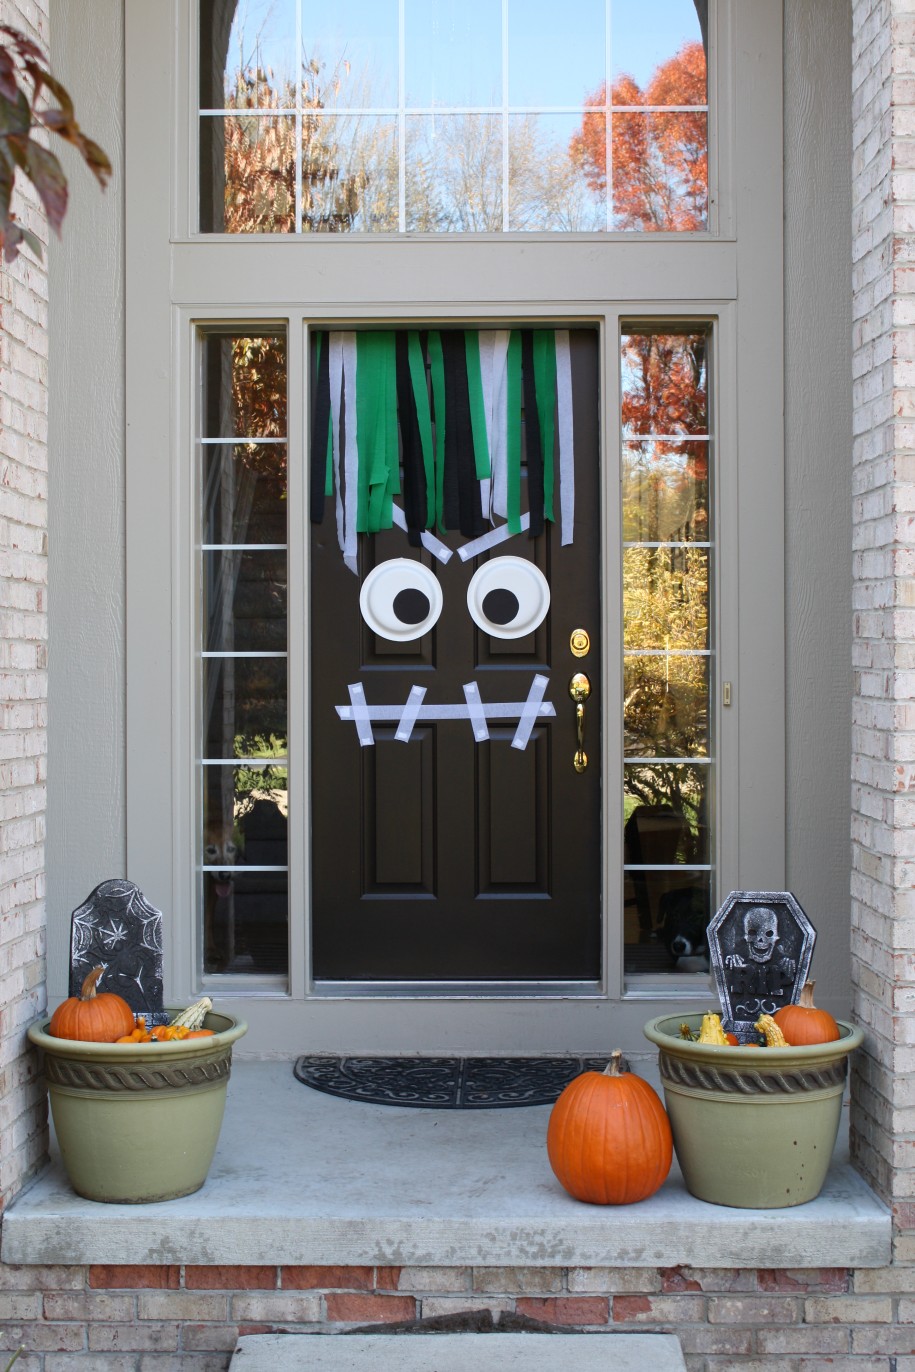 Good Looking Halloween Decorations for Porch